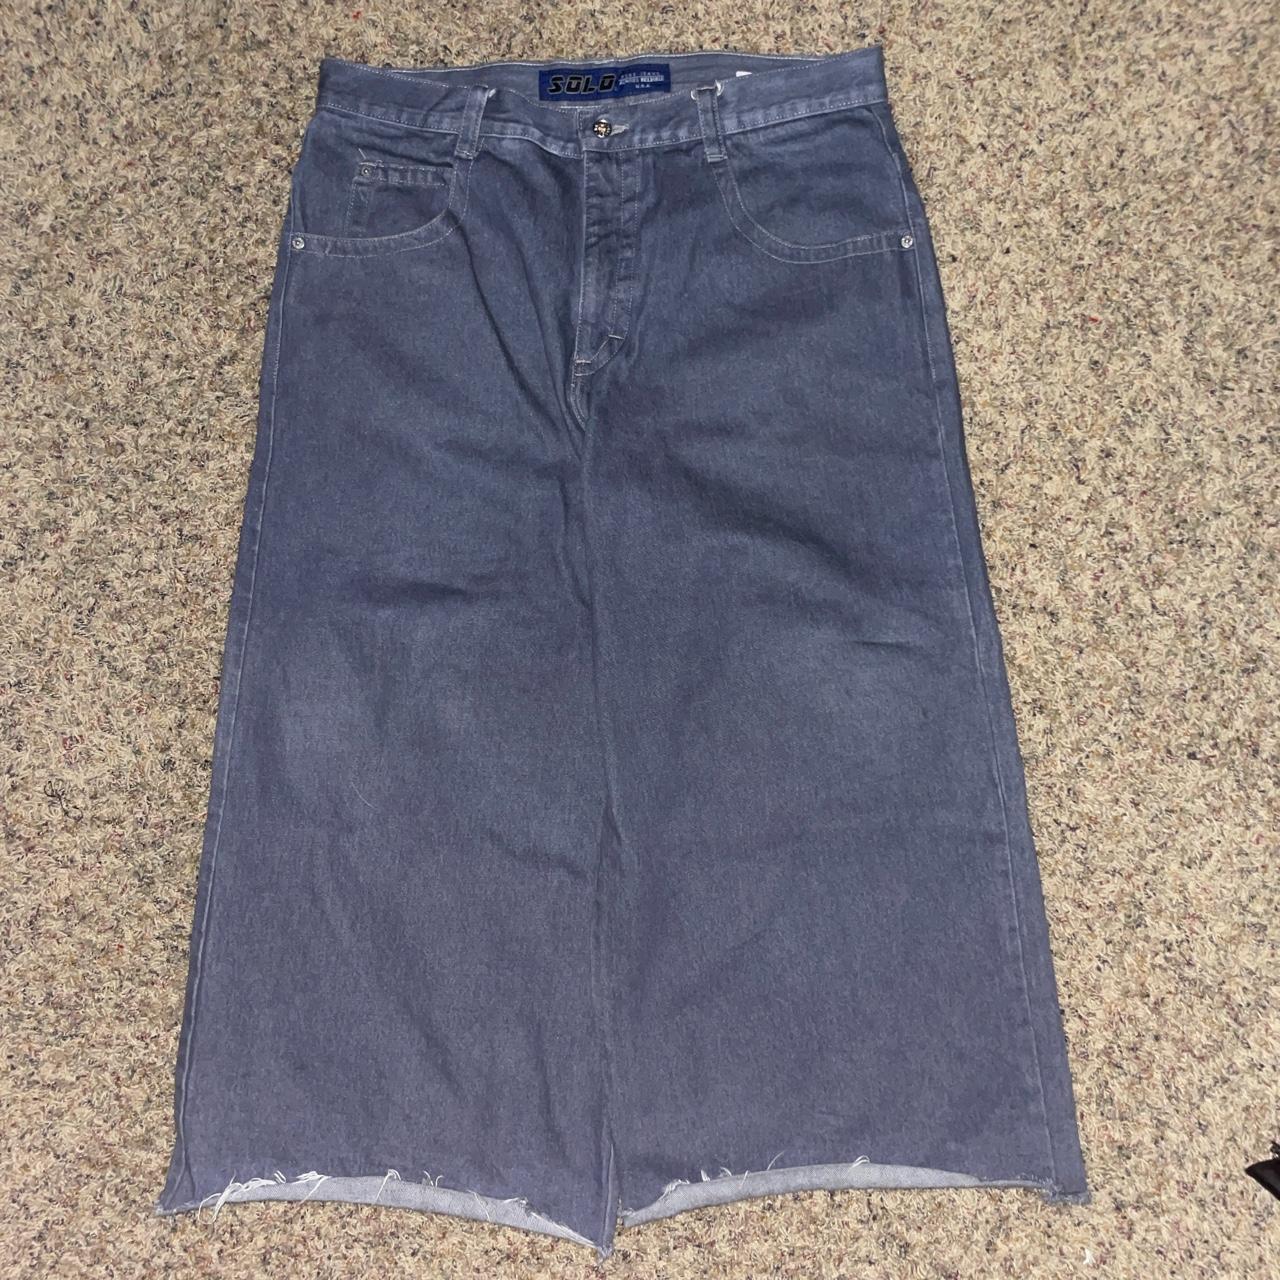 baggy grey solo jnco style jeans 38/32 cut to 38/30 - Depop